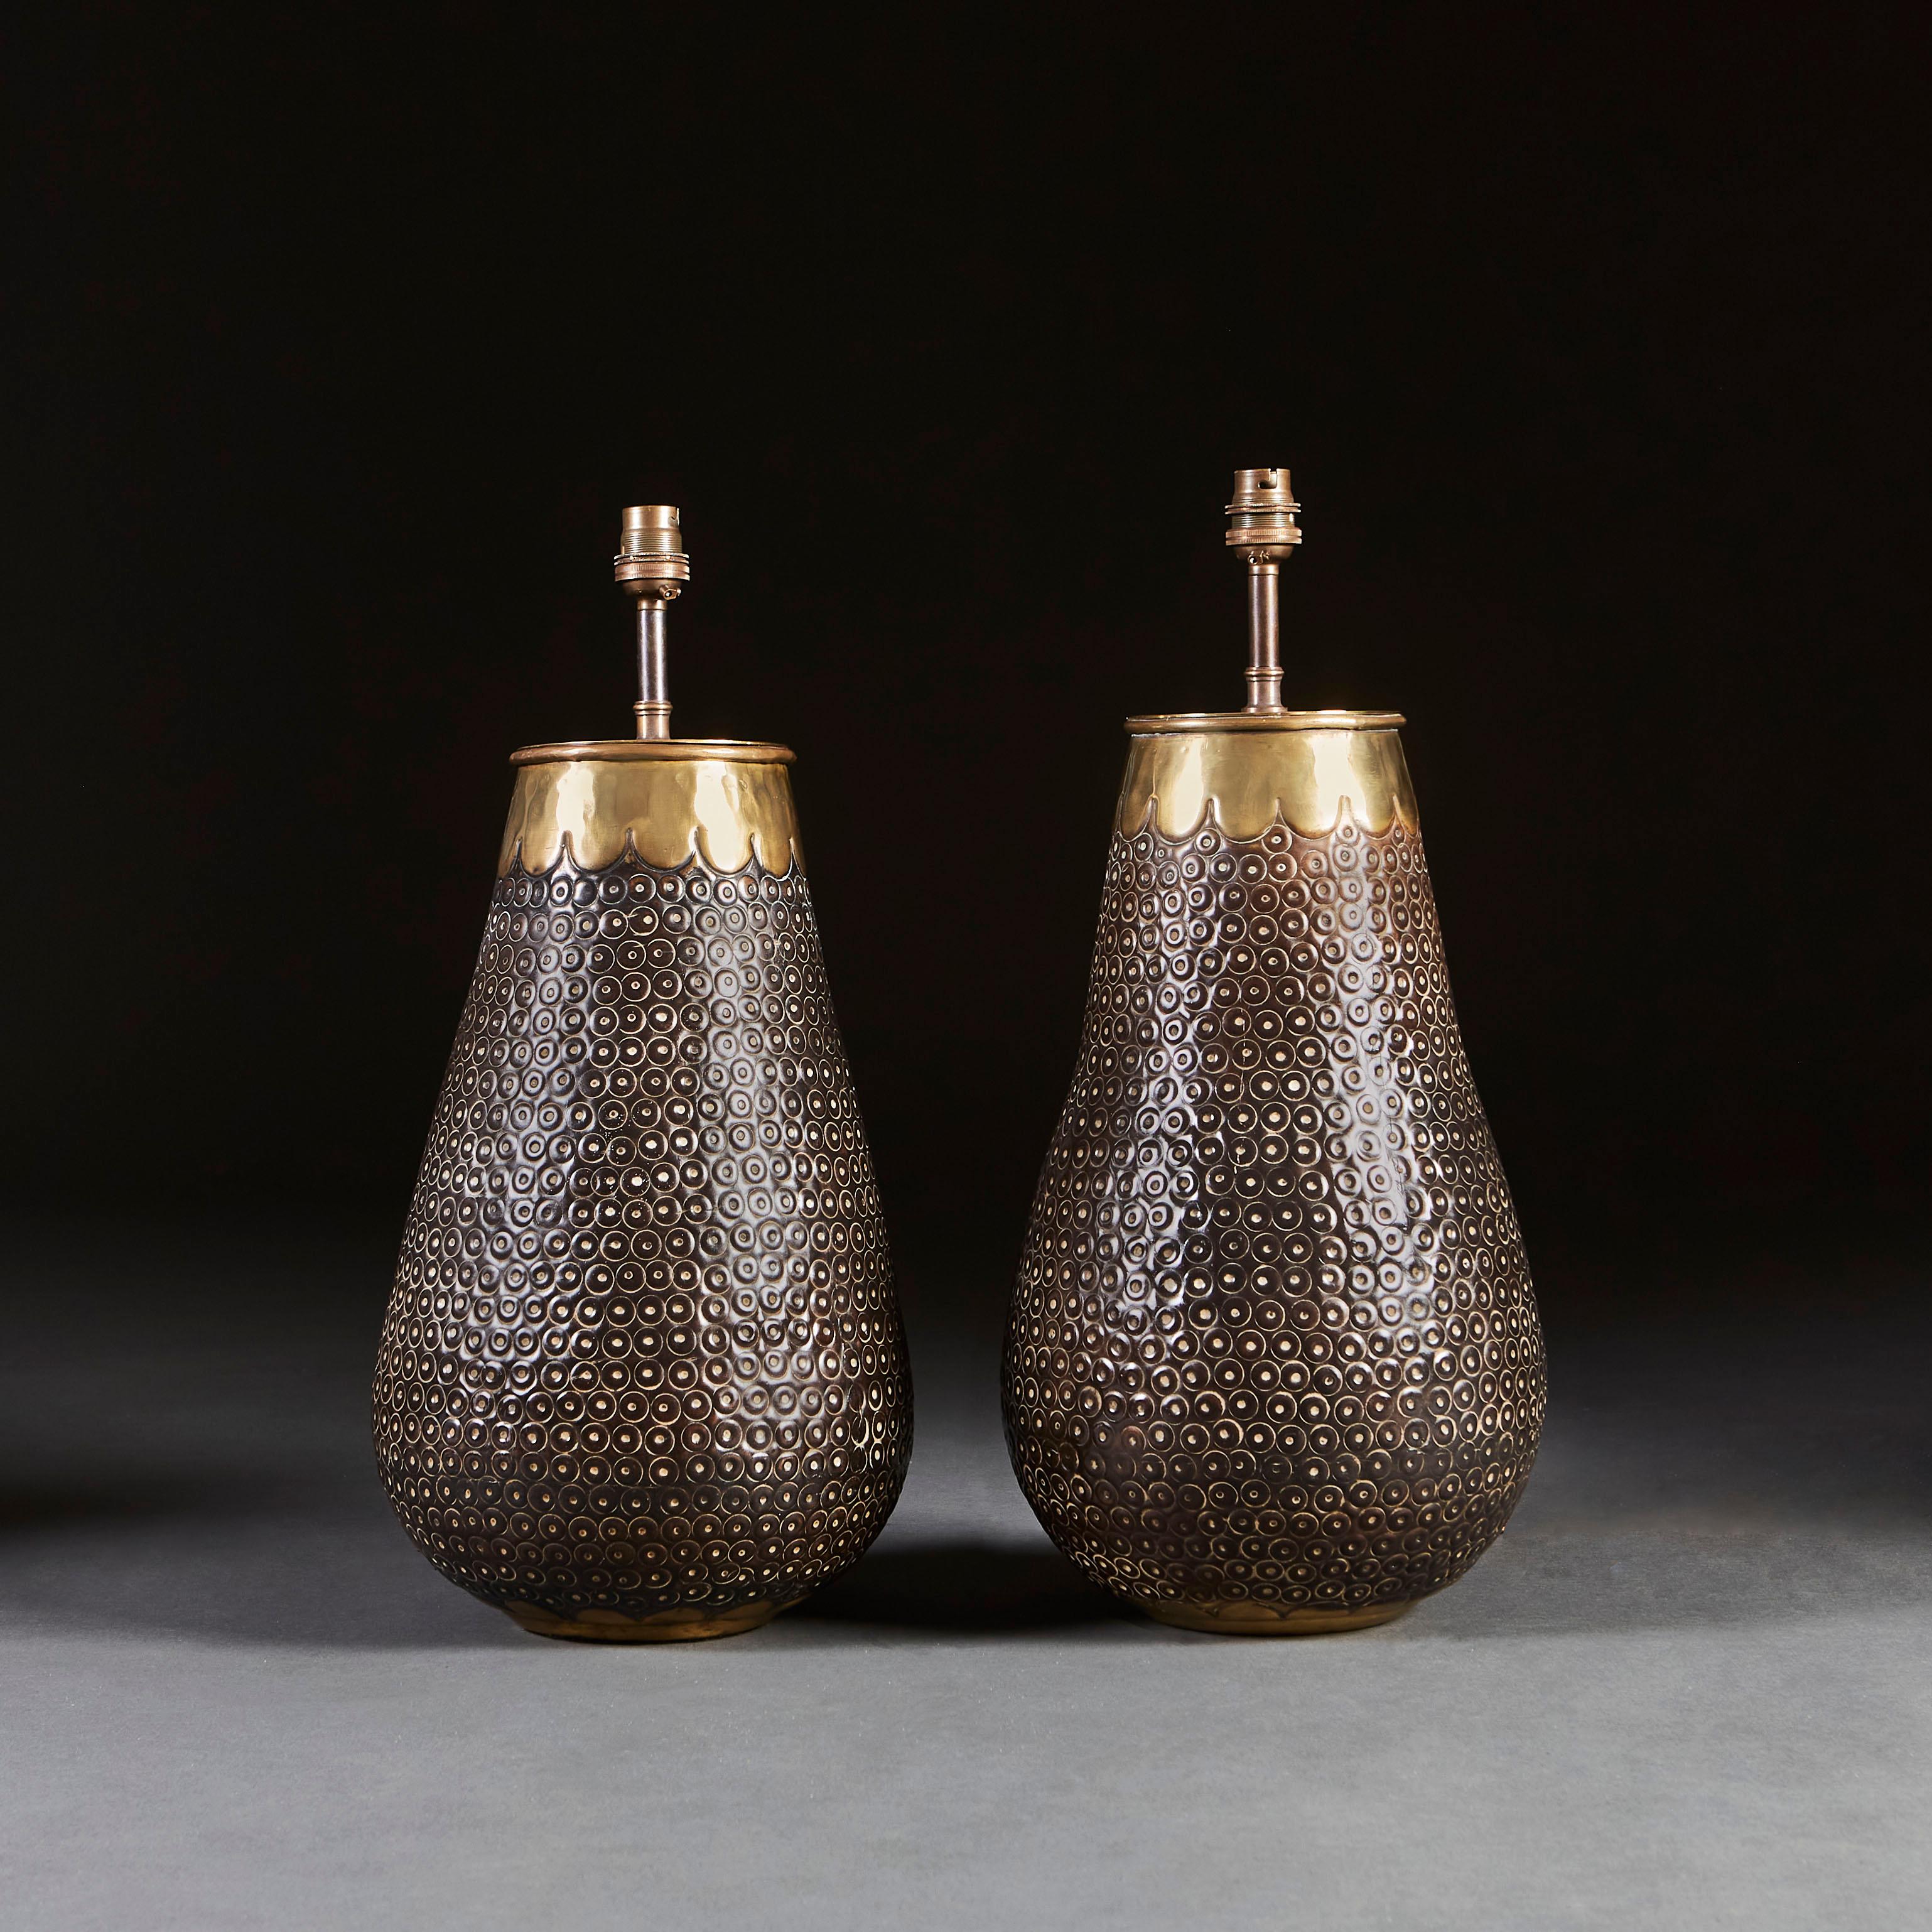 A pair of puched dark metal lamps of baluster form, the rims with contrasting brass bands with scallop edge.